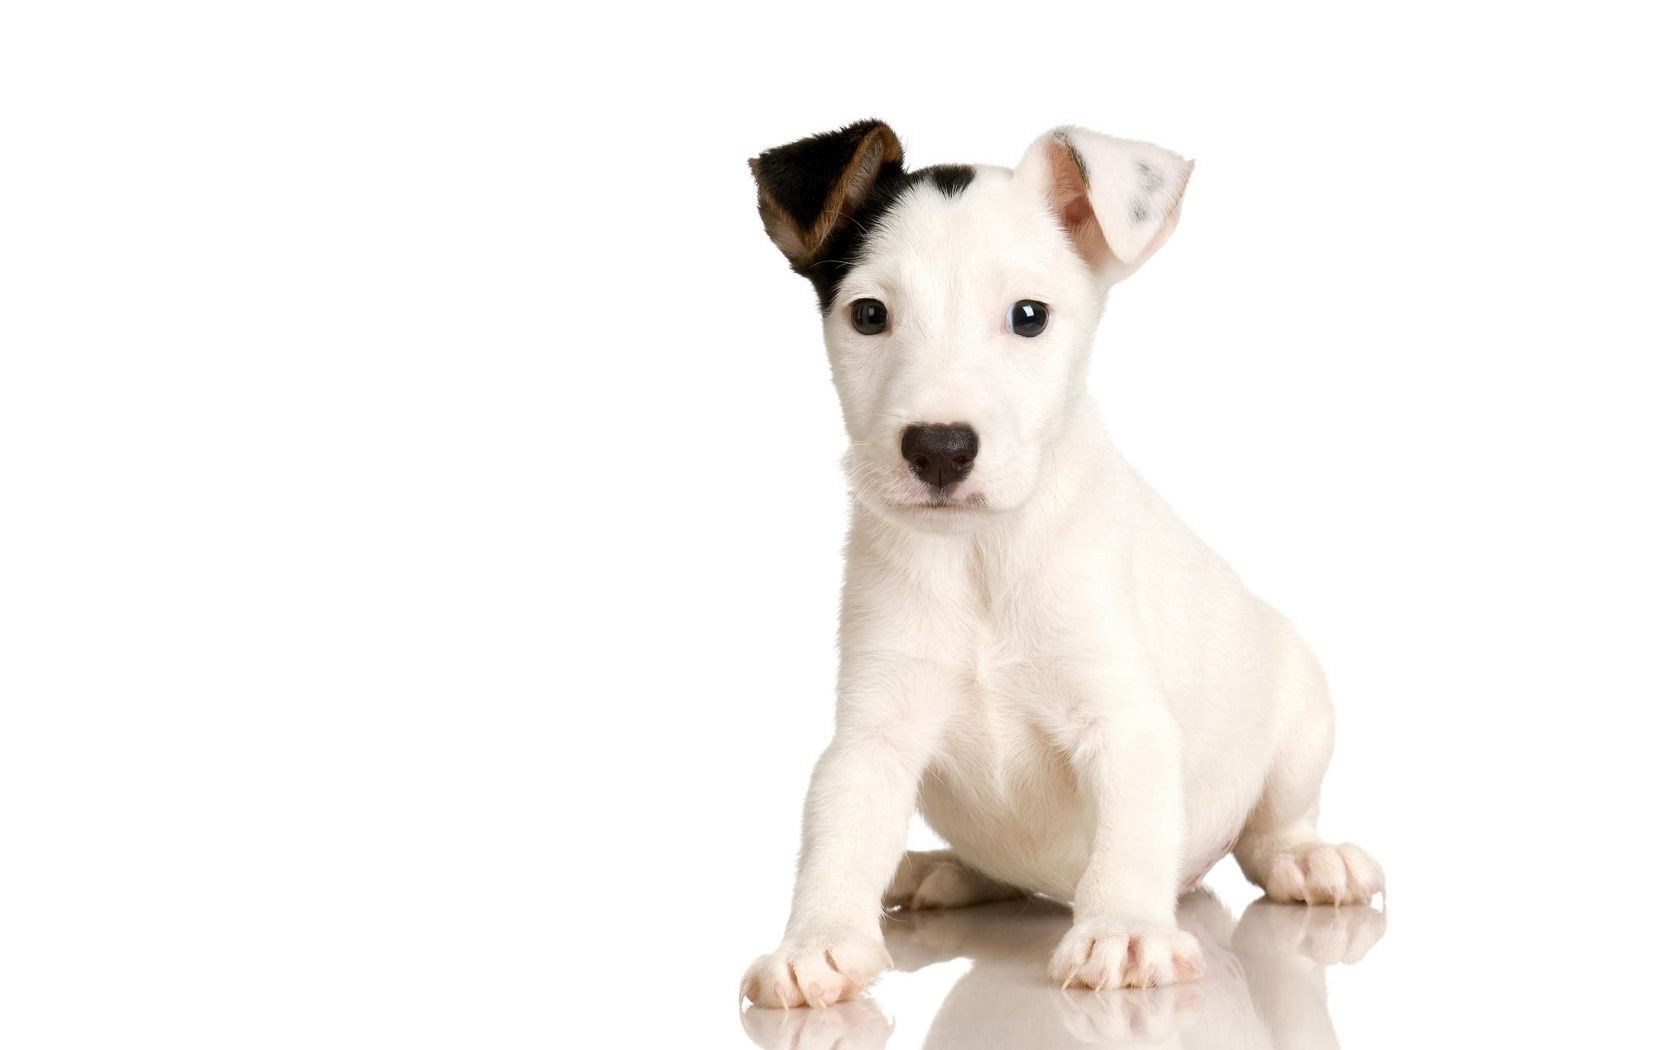 dogs cute dog isolated sit funny little looking pet puppy animal canine young